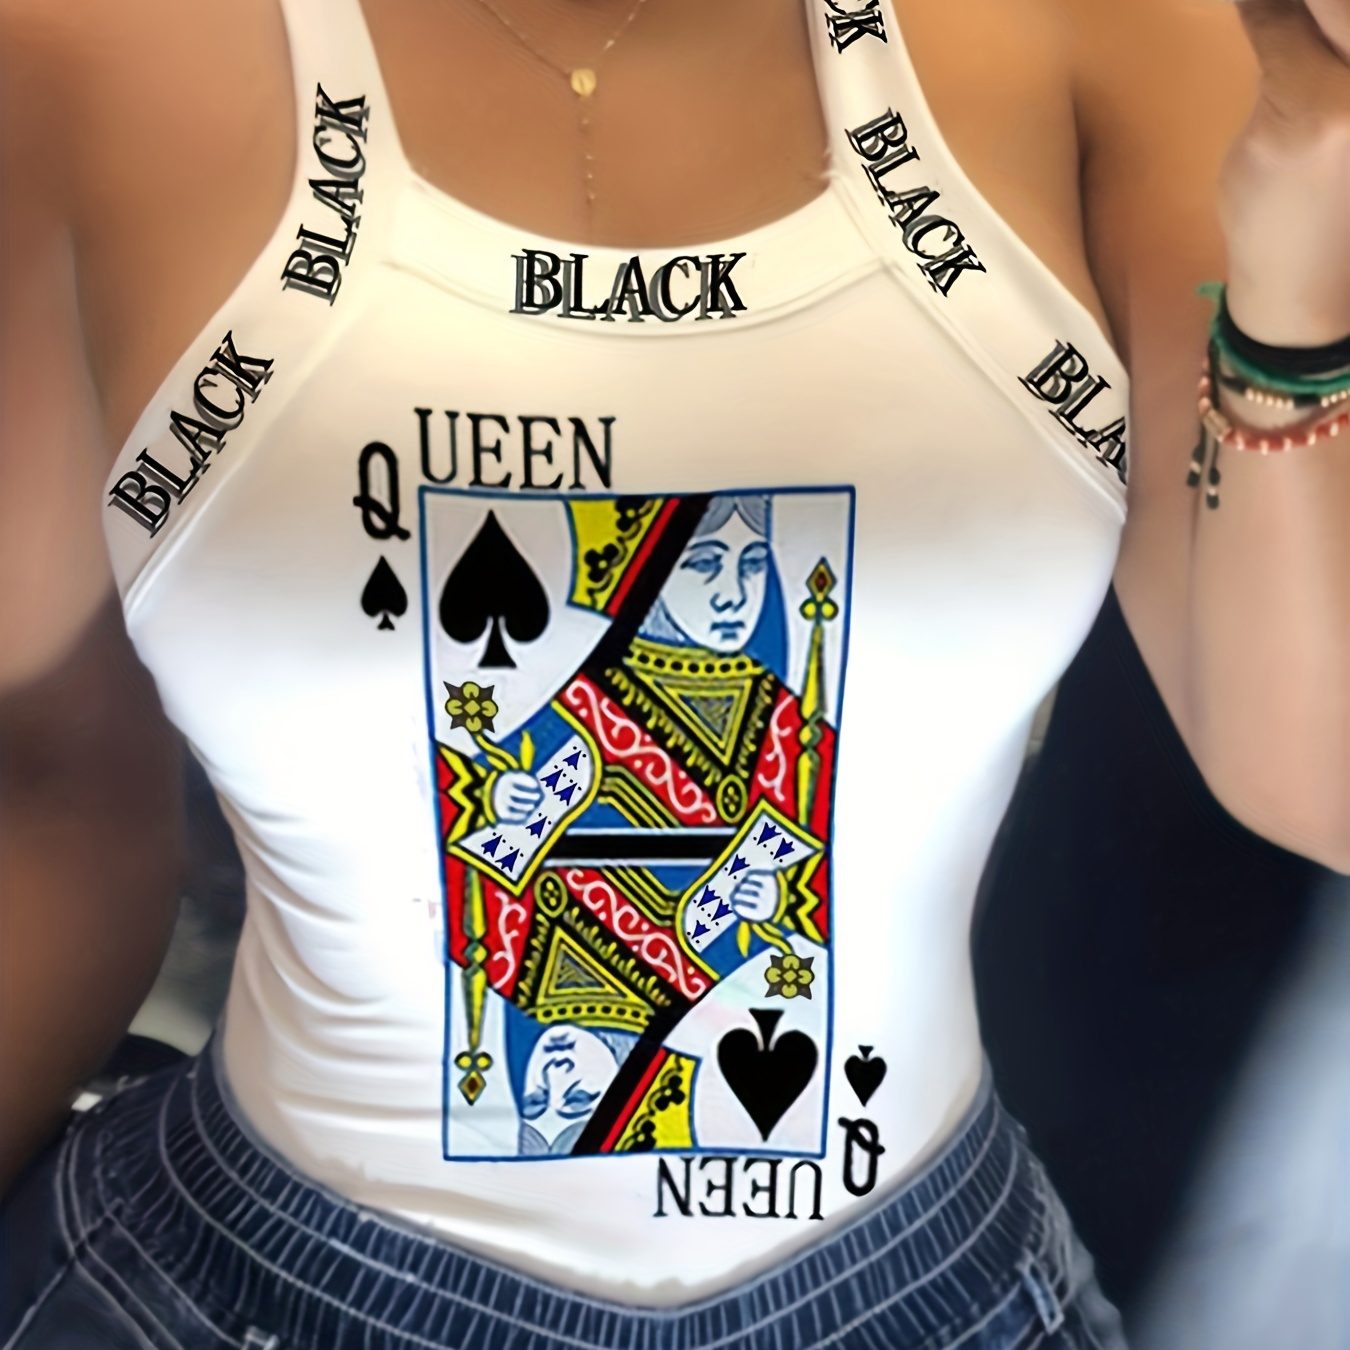 

Poker Queen Print Slim Cami Top, Sexy Back Bow Spaghetti Strap Top For Summer, Women's Clothing